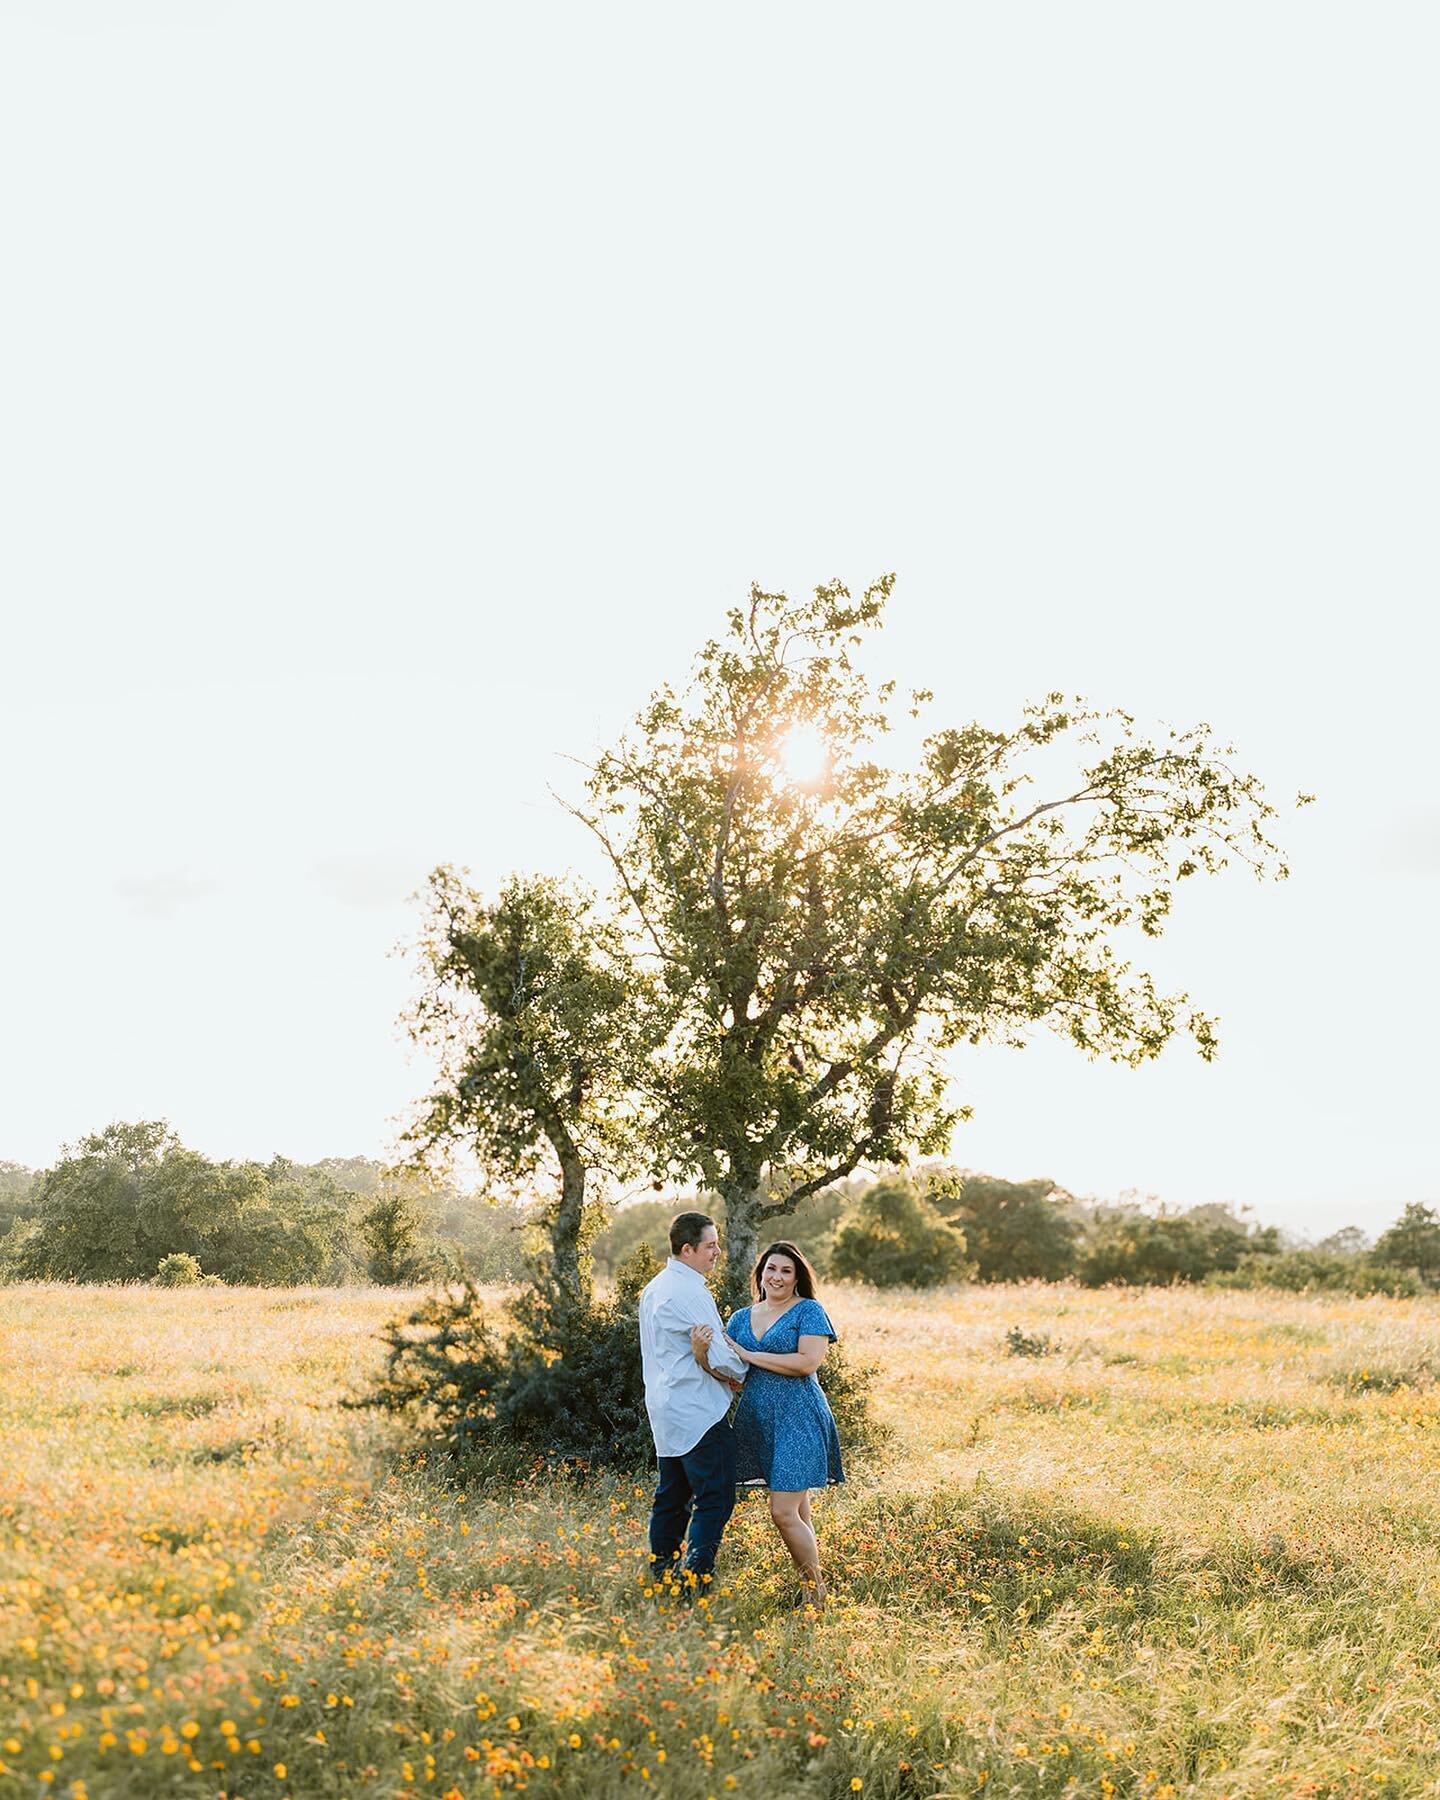 We just had the pleasure of capturing the sweetest engagement session with this beautiful couple who are head-over-heels in love! 💕 From the way he looks at her to the way she laughs with him, it's clear they were meant to be together forever. We ca